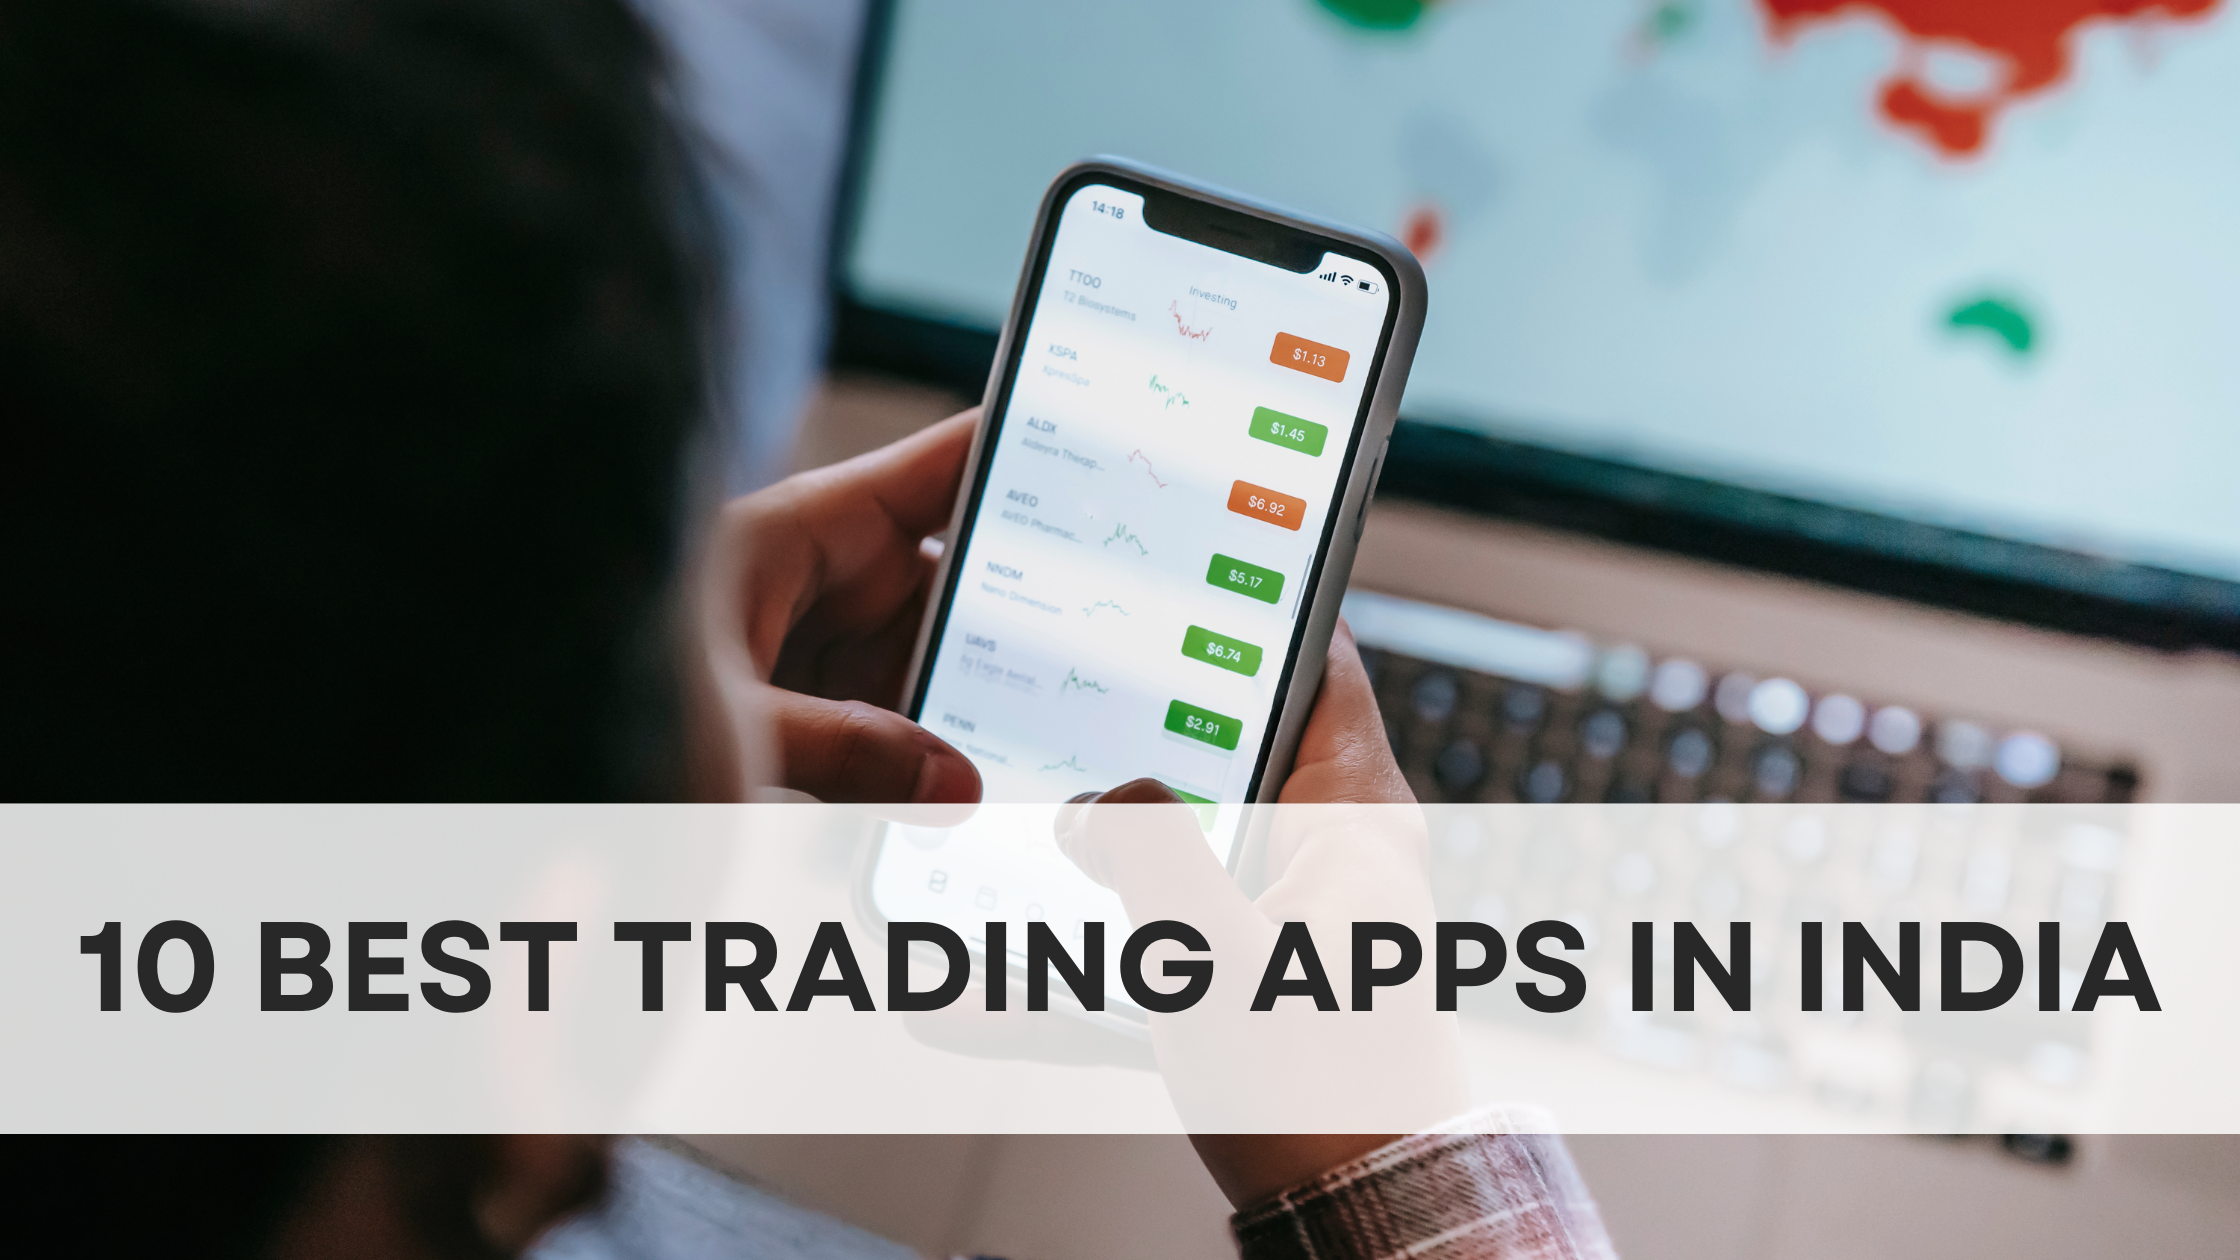 10 Best Trading Apps in India